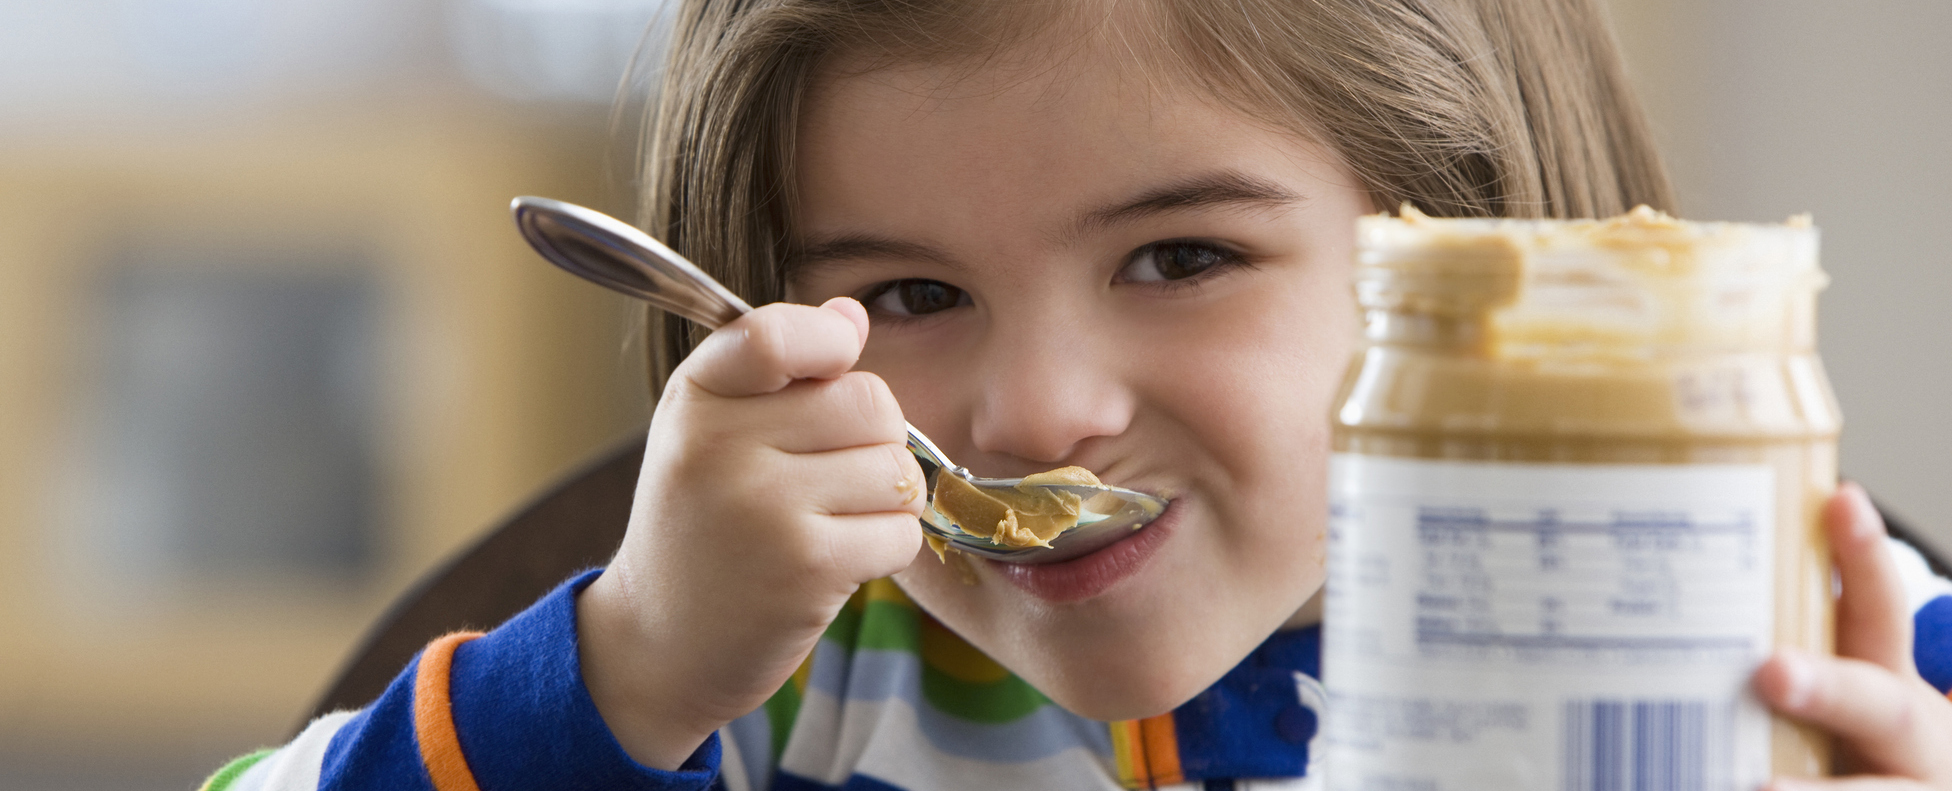 Simple Test May Predict Whether Your Child Will Outgrow Their Peanut Allergy